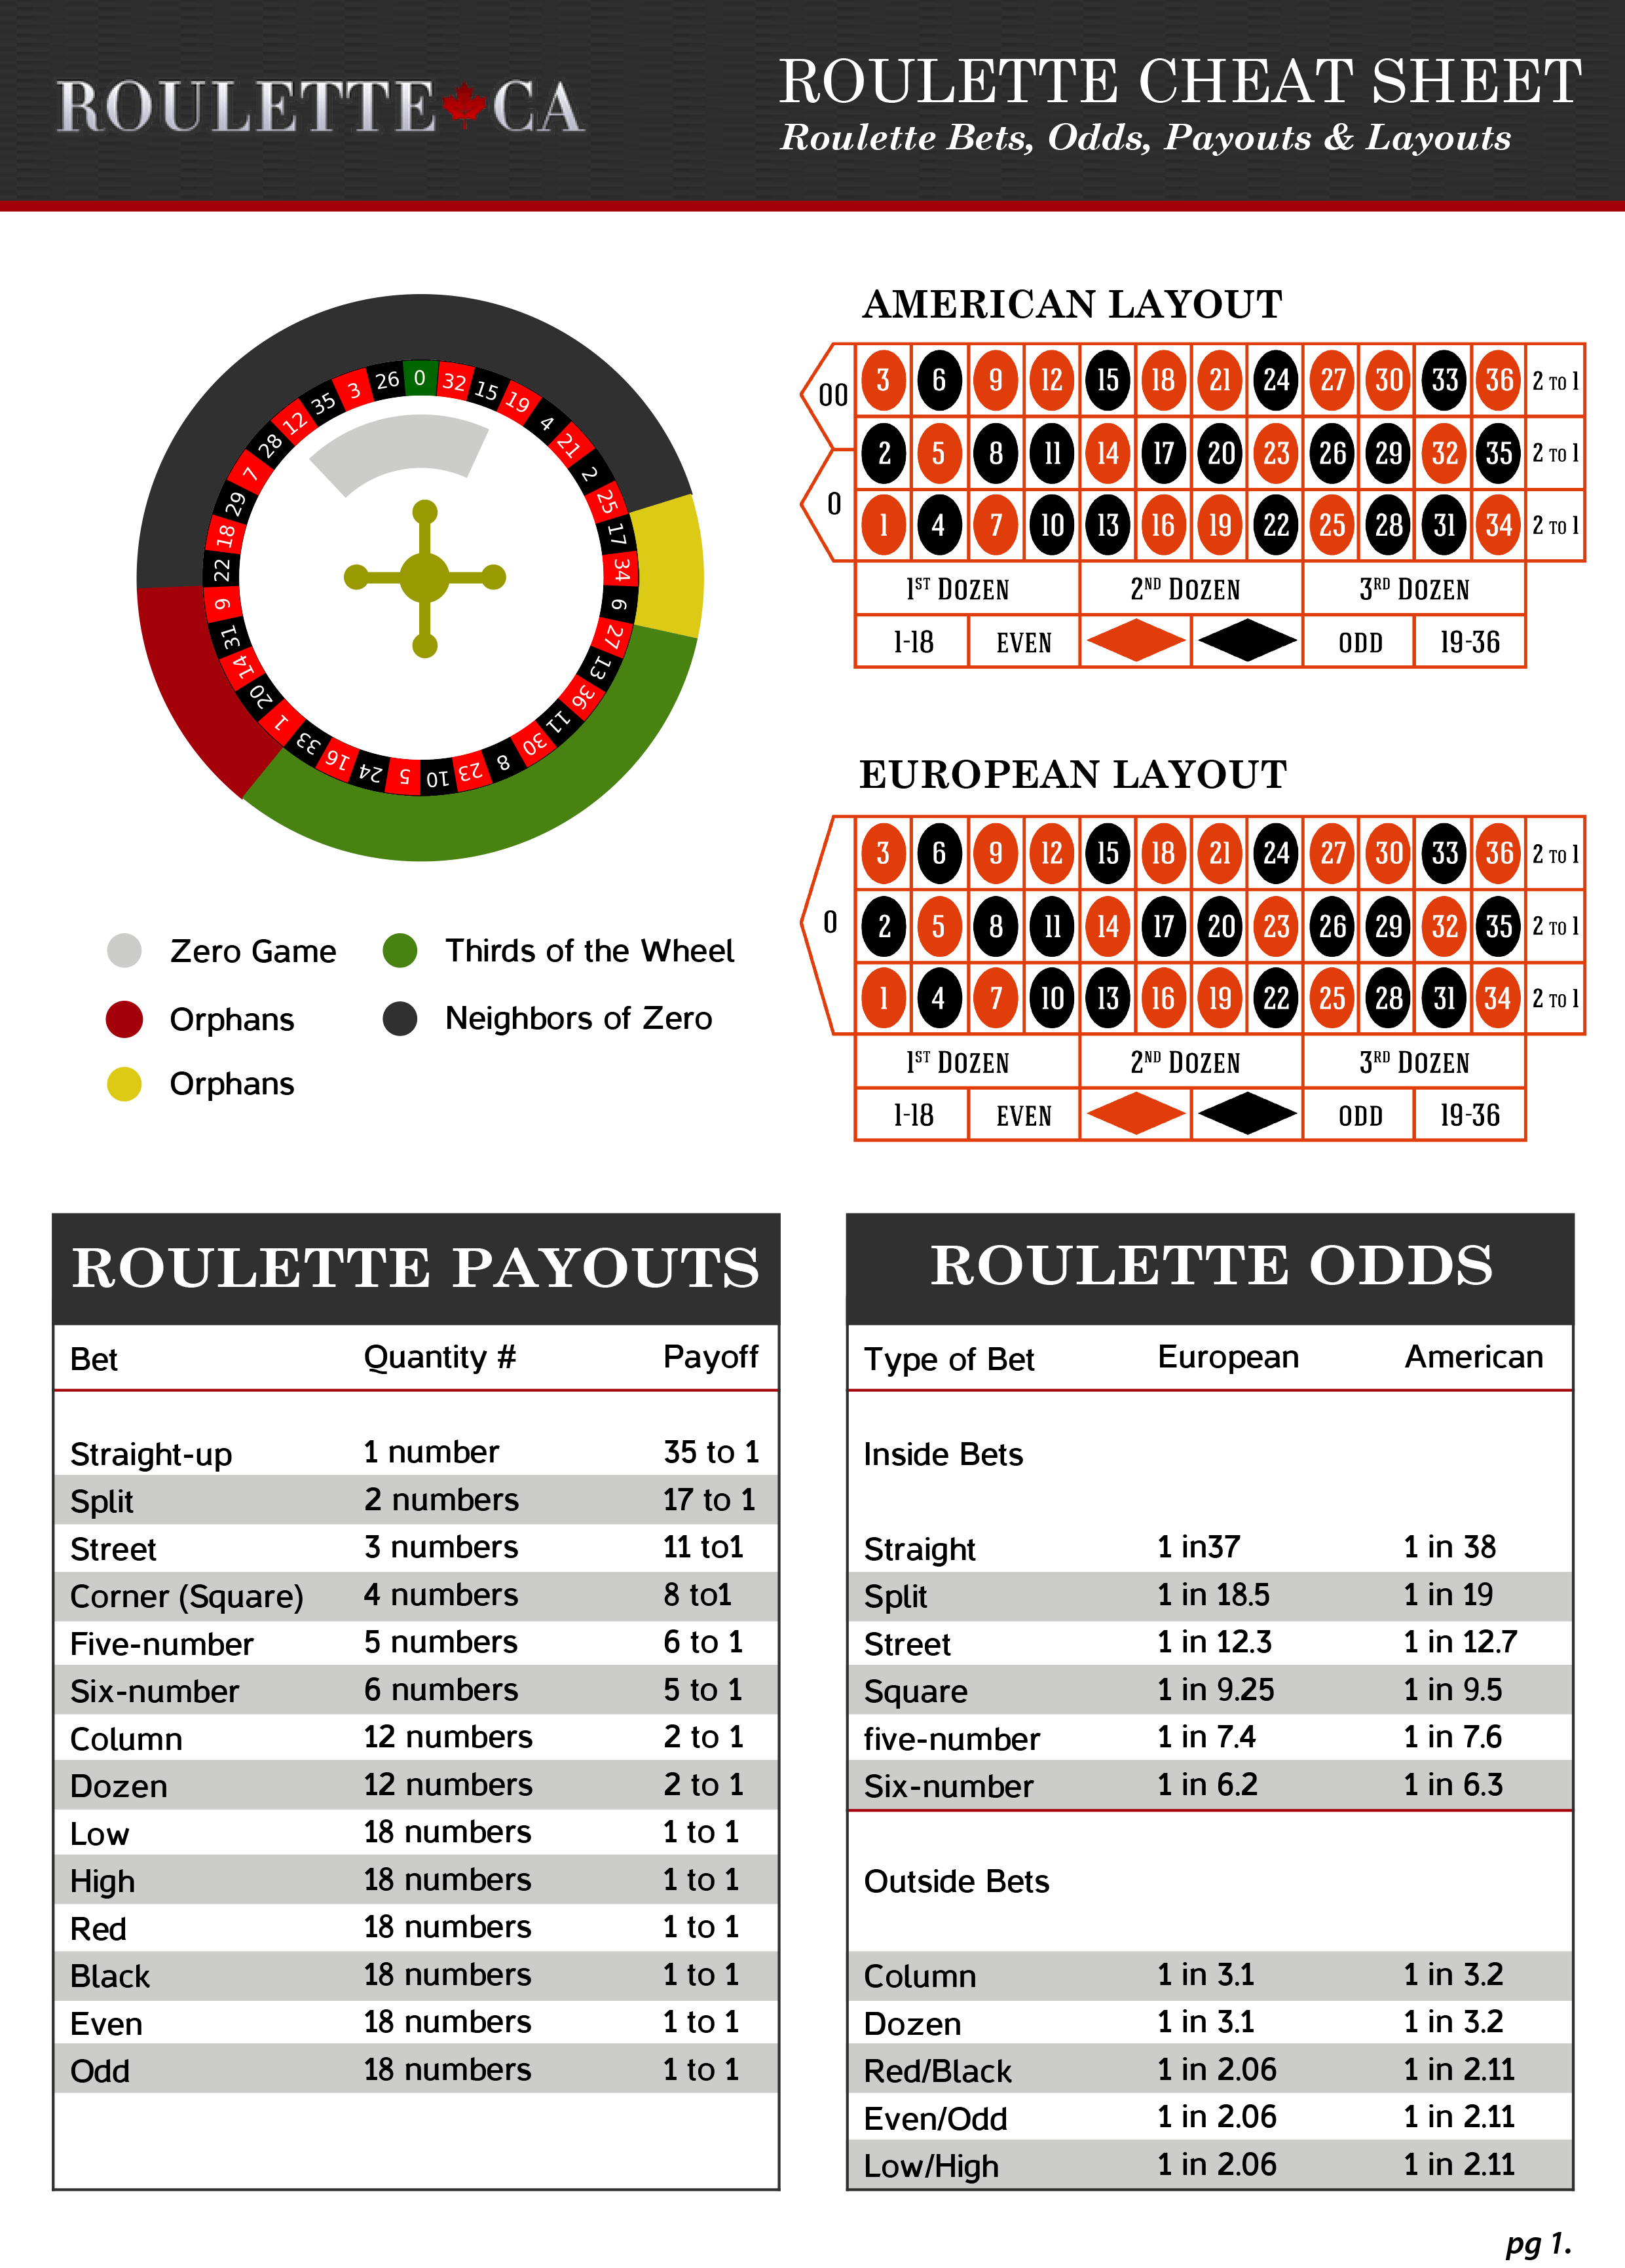 payout on 10 dollar bet in roulette